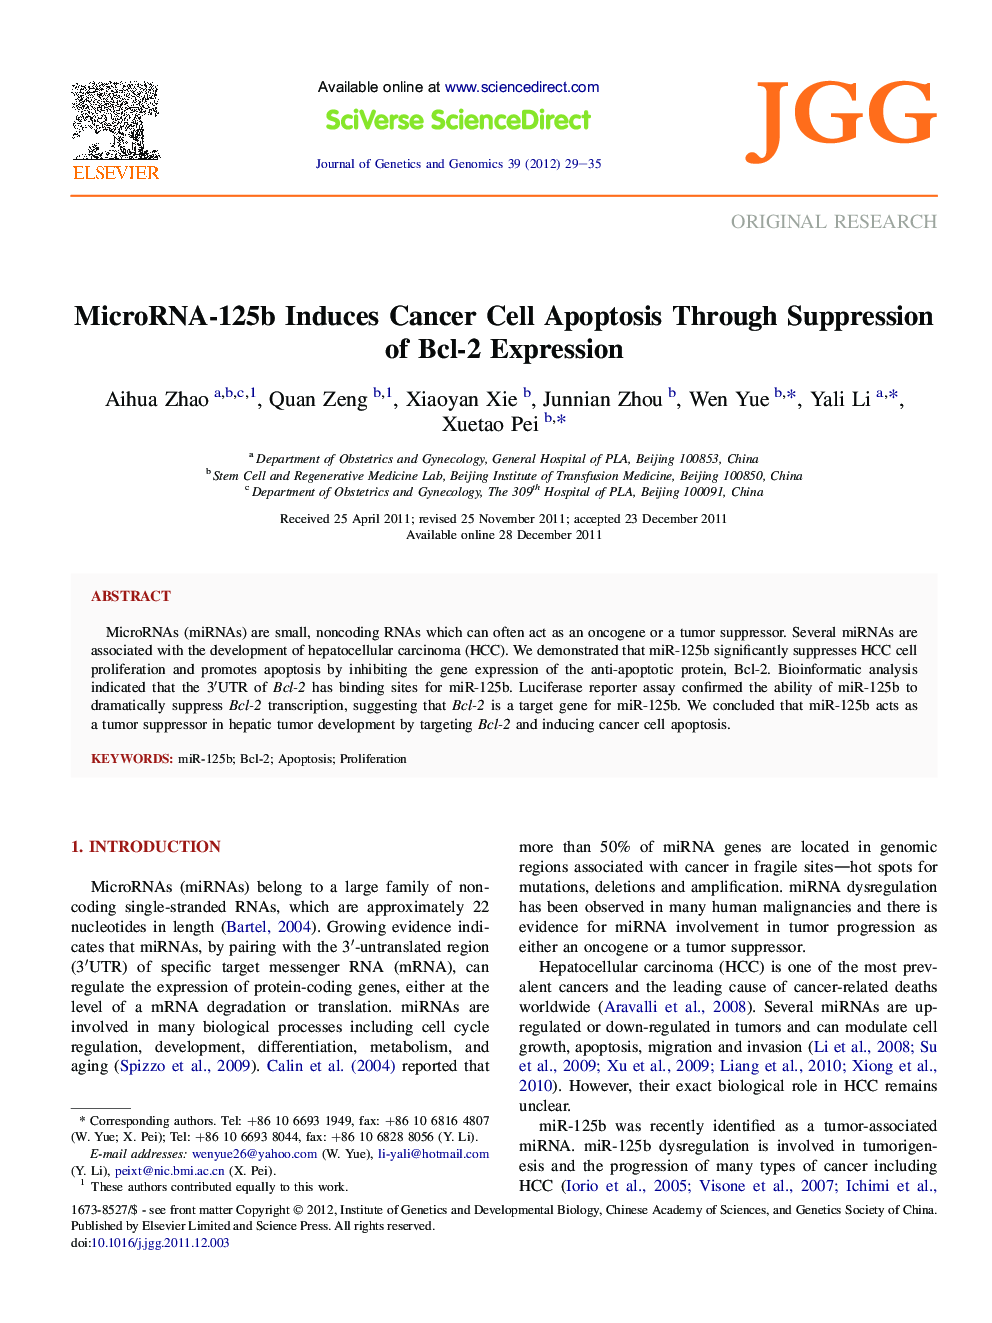 MicroRNA-125b Induces Cancer Cell Apoptosis Through Suppression of Bcl-2 Expression